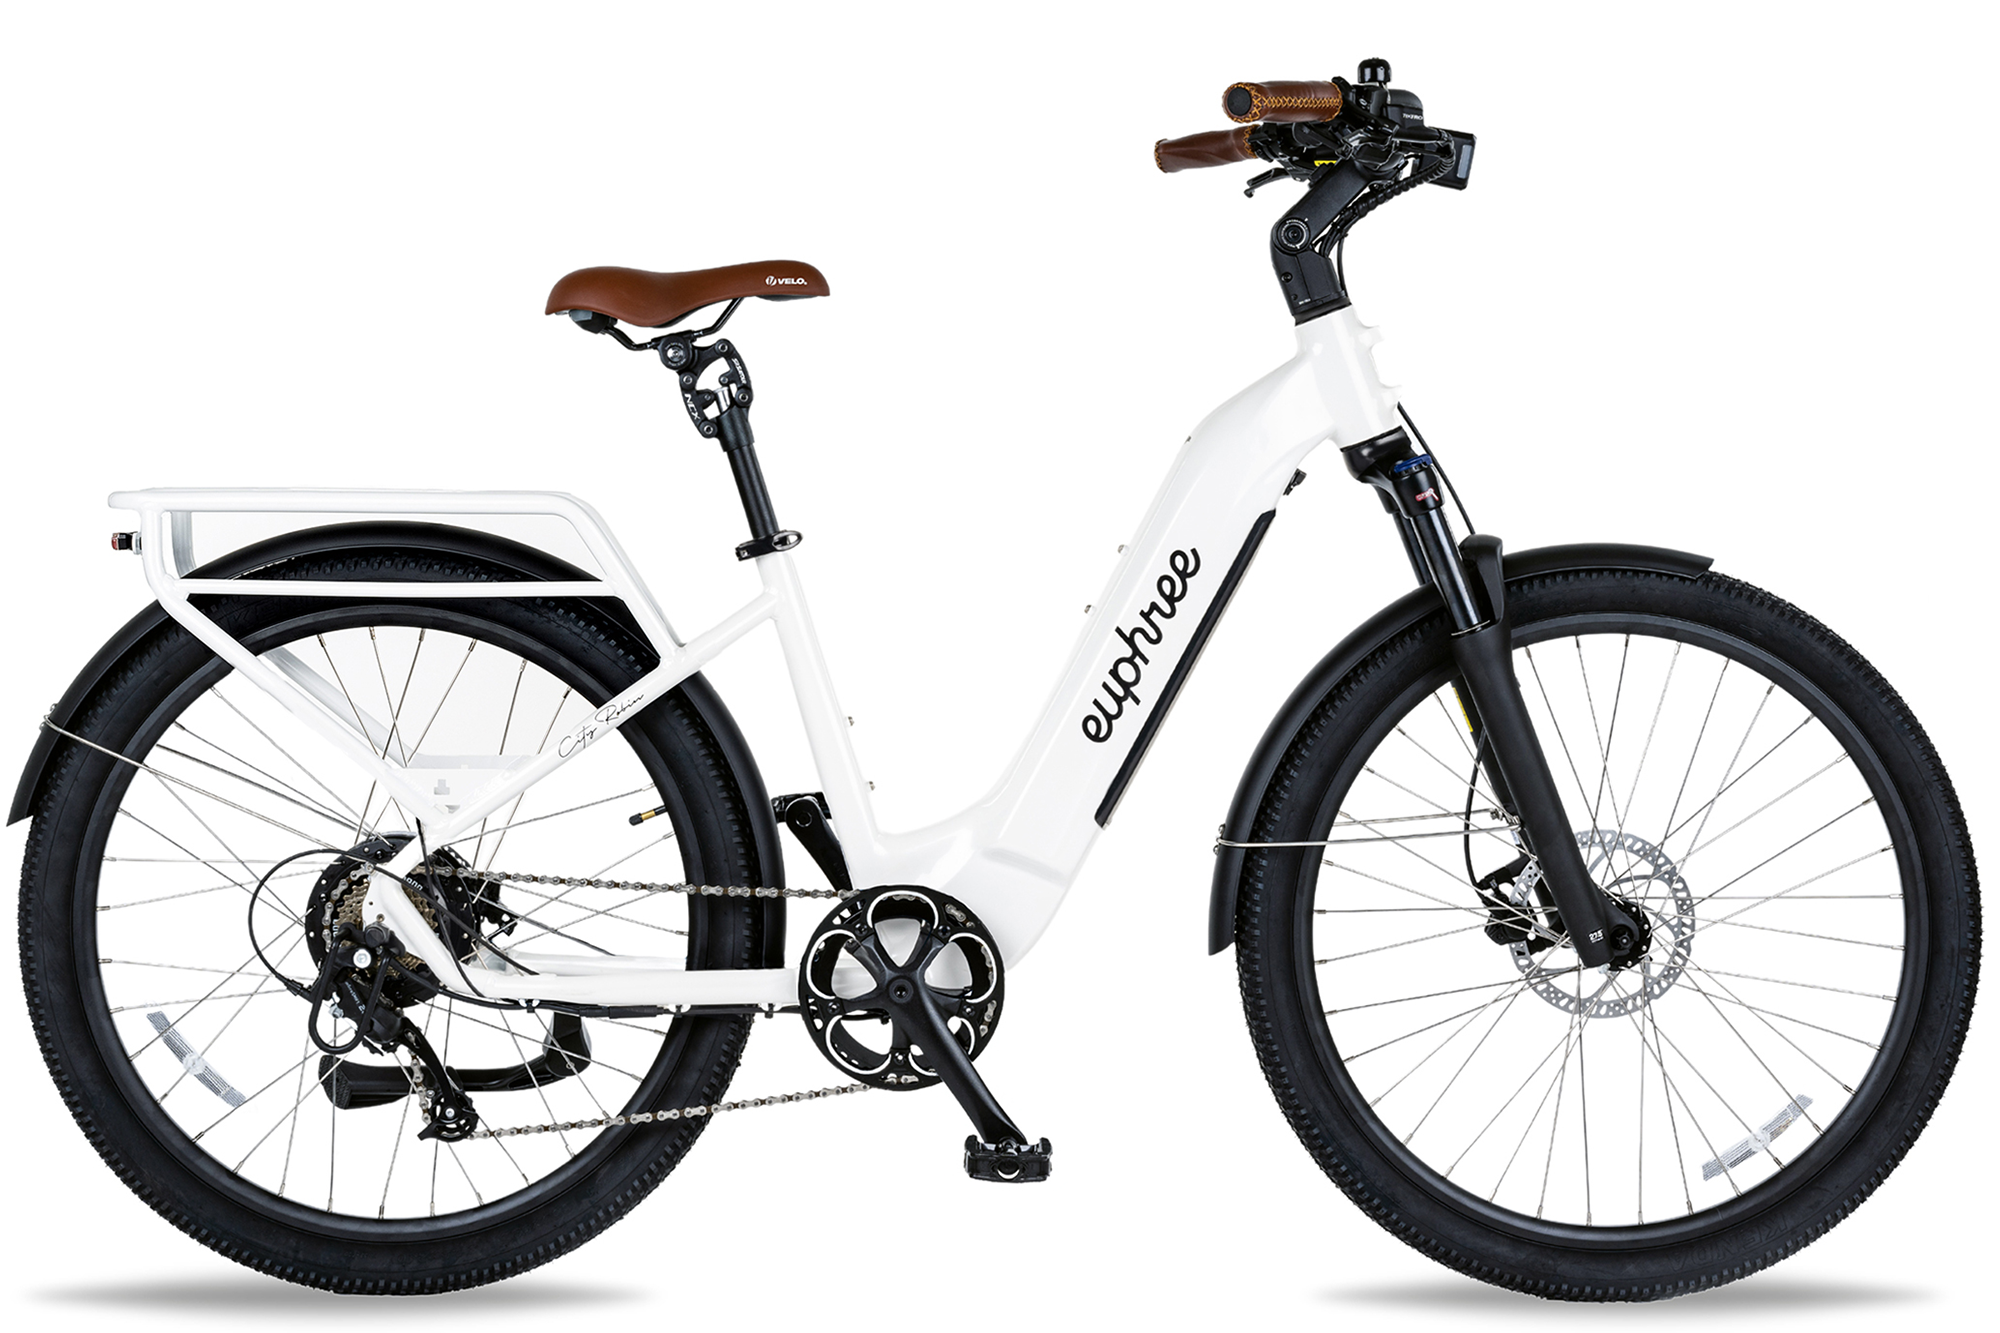 Pearl White Step Thru Electric Bike from Euphree - Comfortable and Stylish Electric Bike with Step-Through Frame